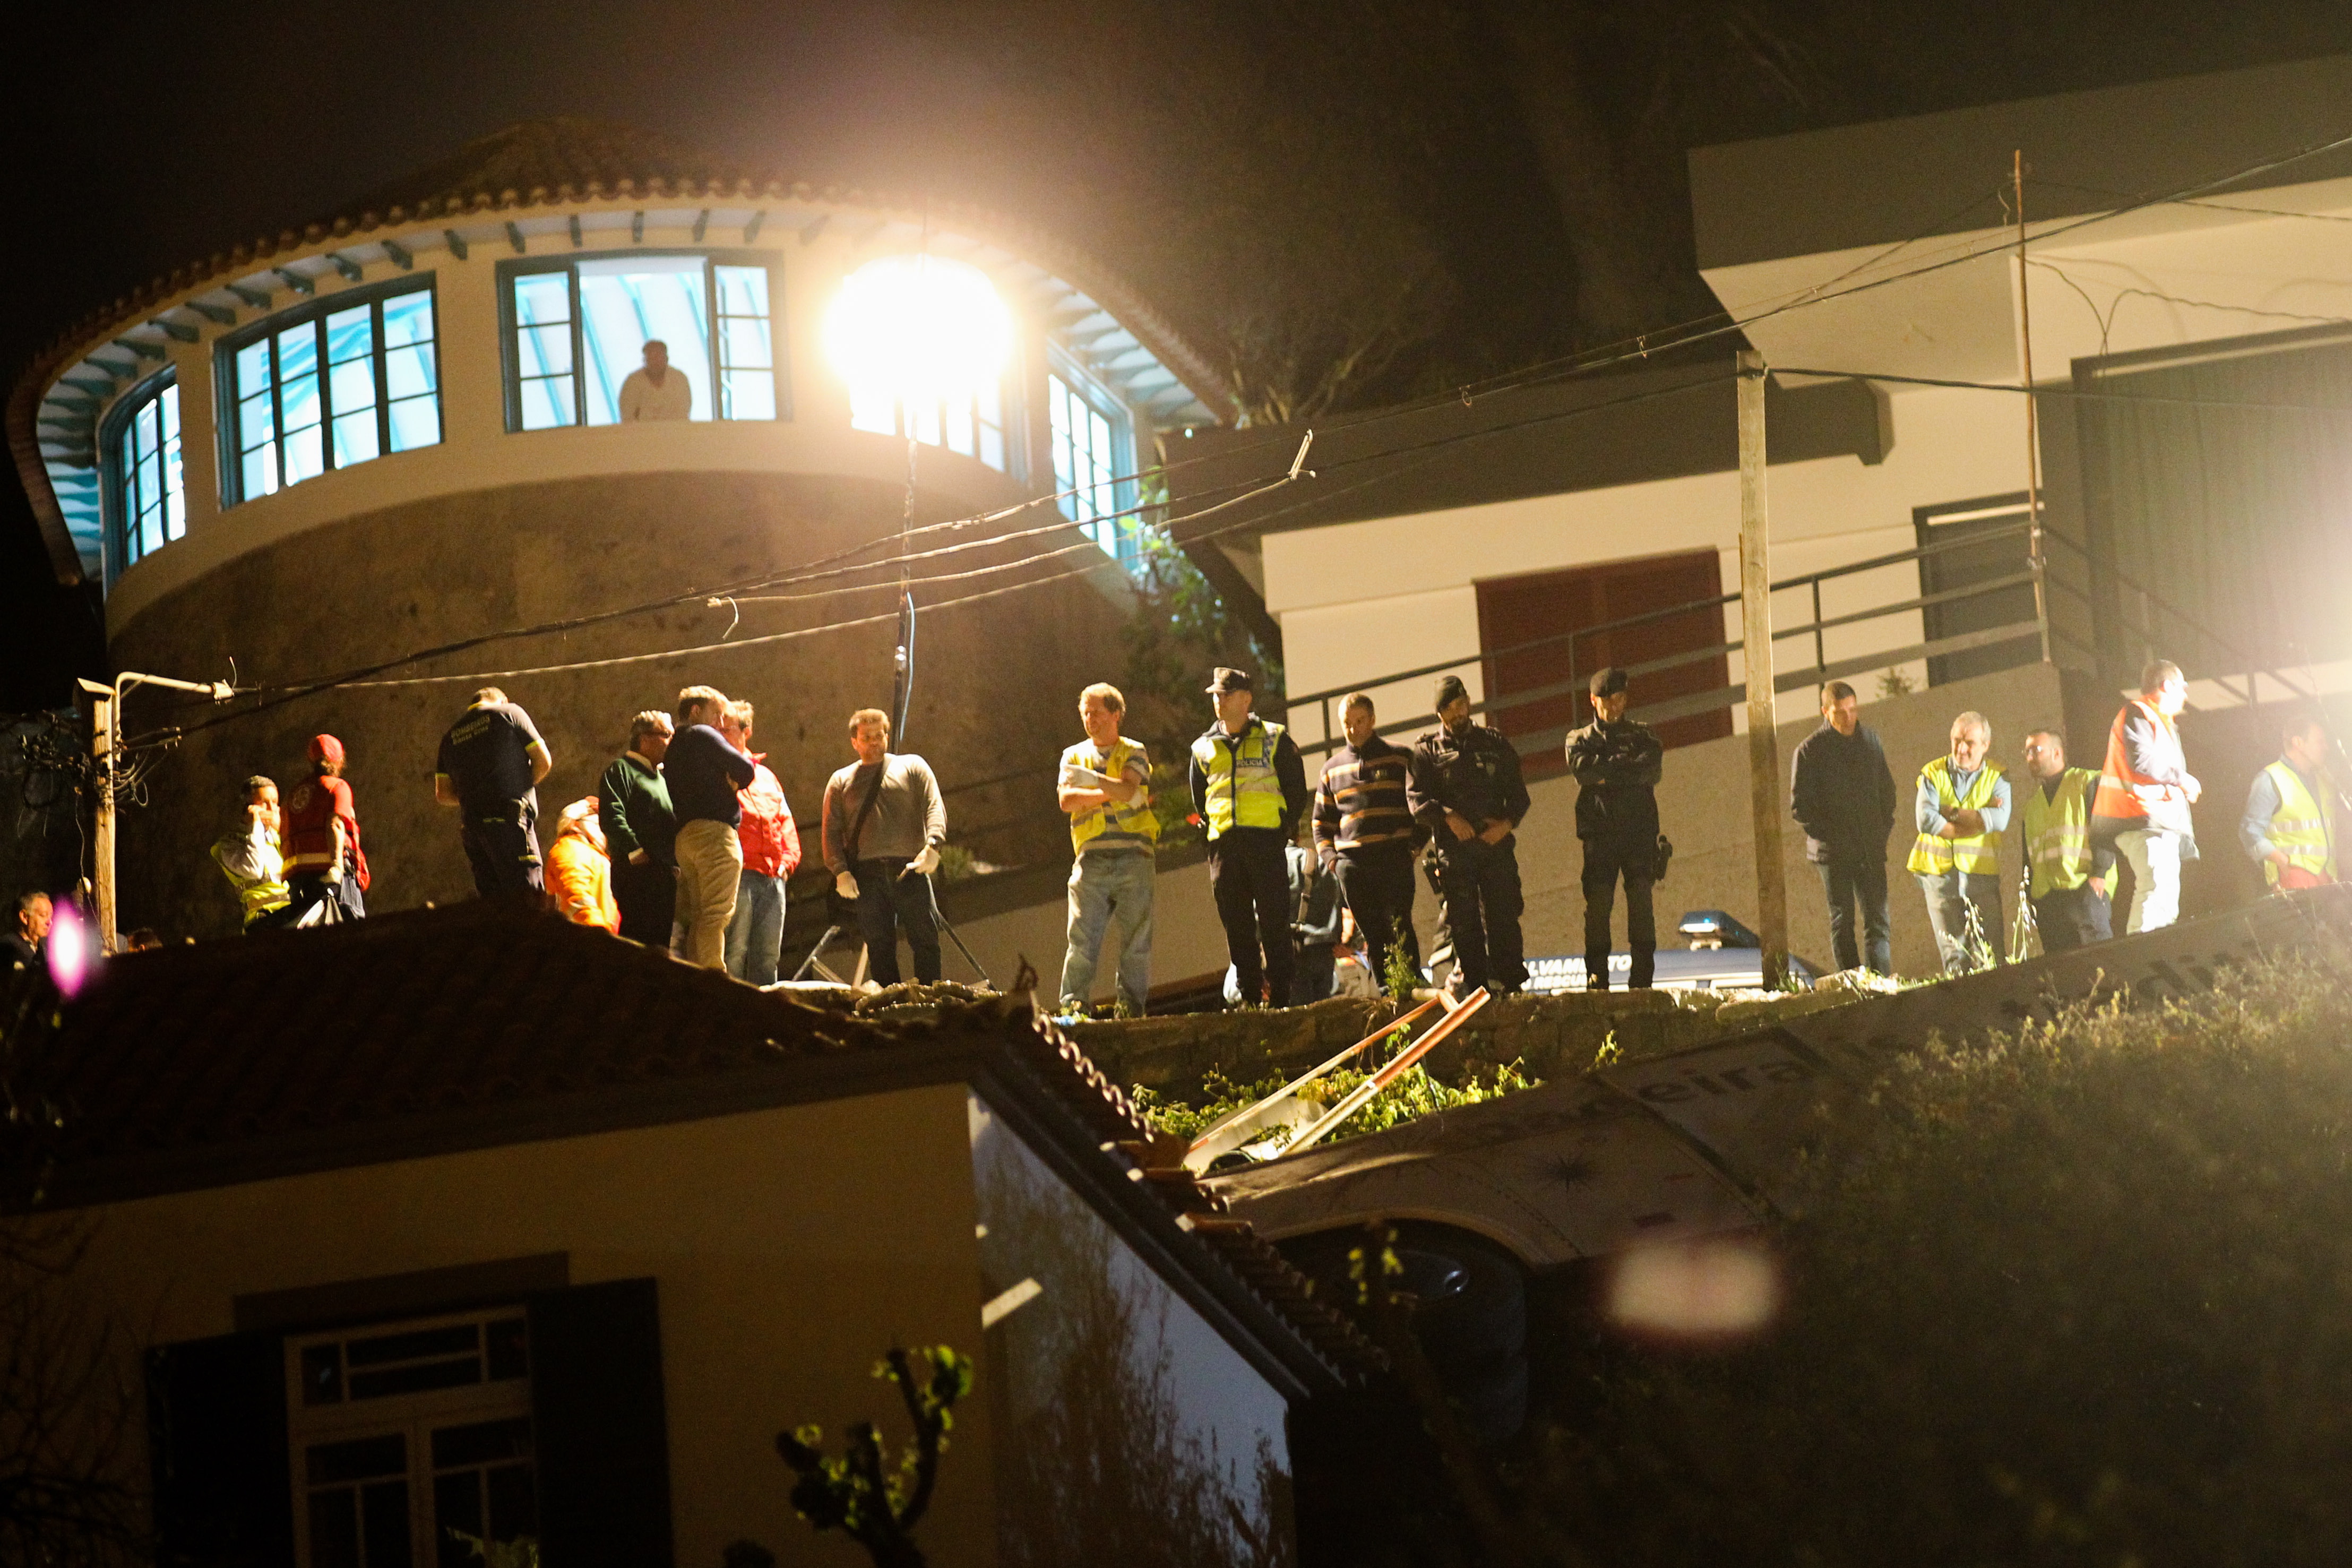 epa07512963 Emergency personnel at the site where an accident involving a tourist bus has caused deaths in Caniço, Santa Cruz, Madeira Island, Portugal, 17 April 2019. According the Civil Protection of Madeira, the accident occurred at 18:30 and 19 emergency medical vehicles are on site. According to media repots at least 28 people were killed in the crash.  EPA/HOMEM GOUVEIA